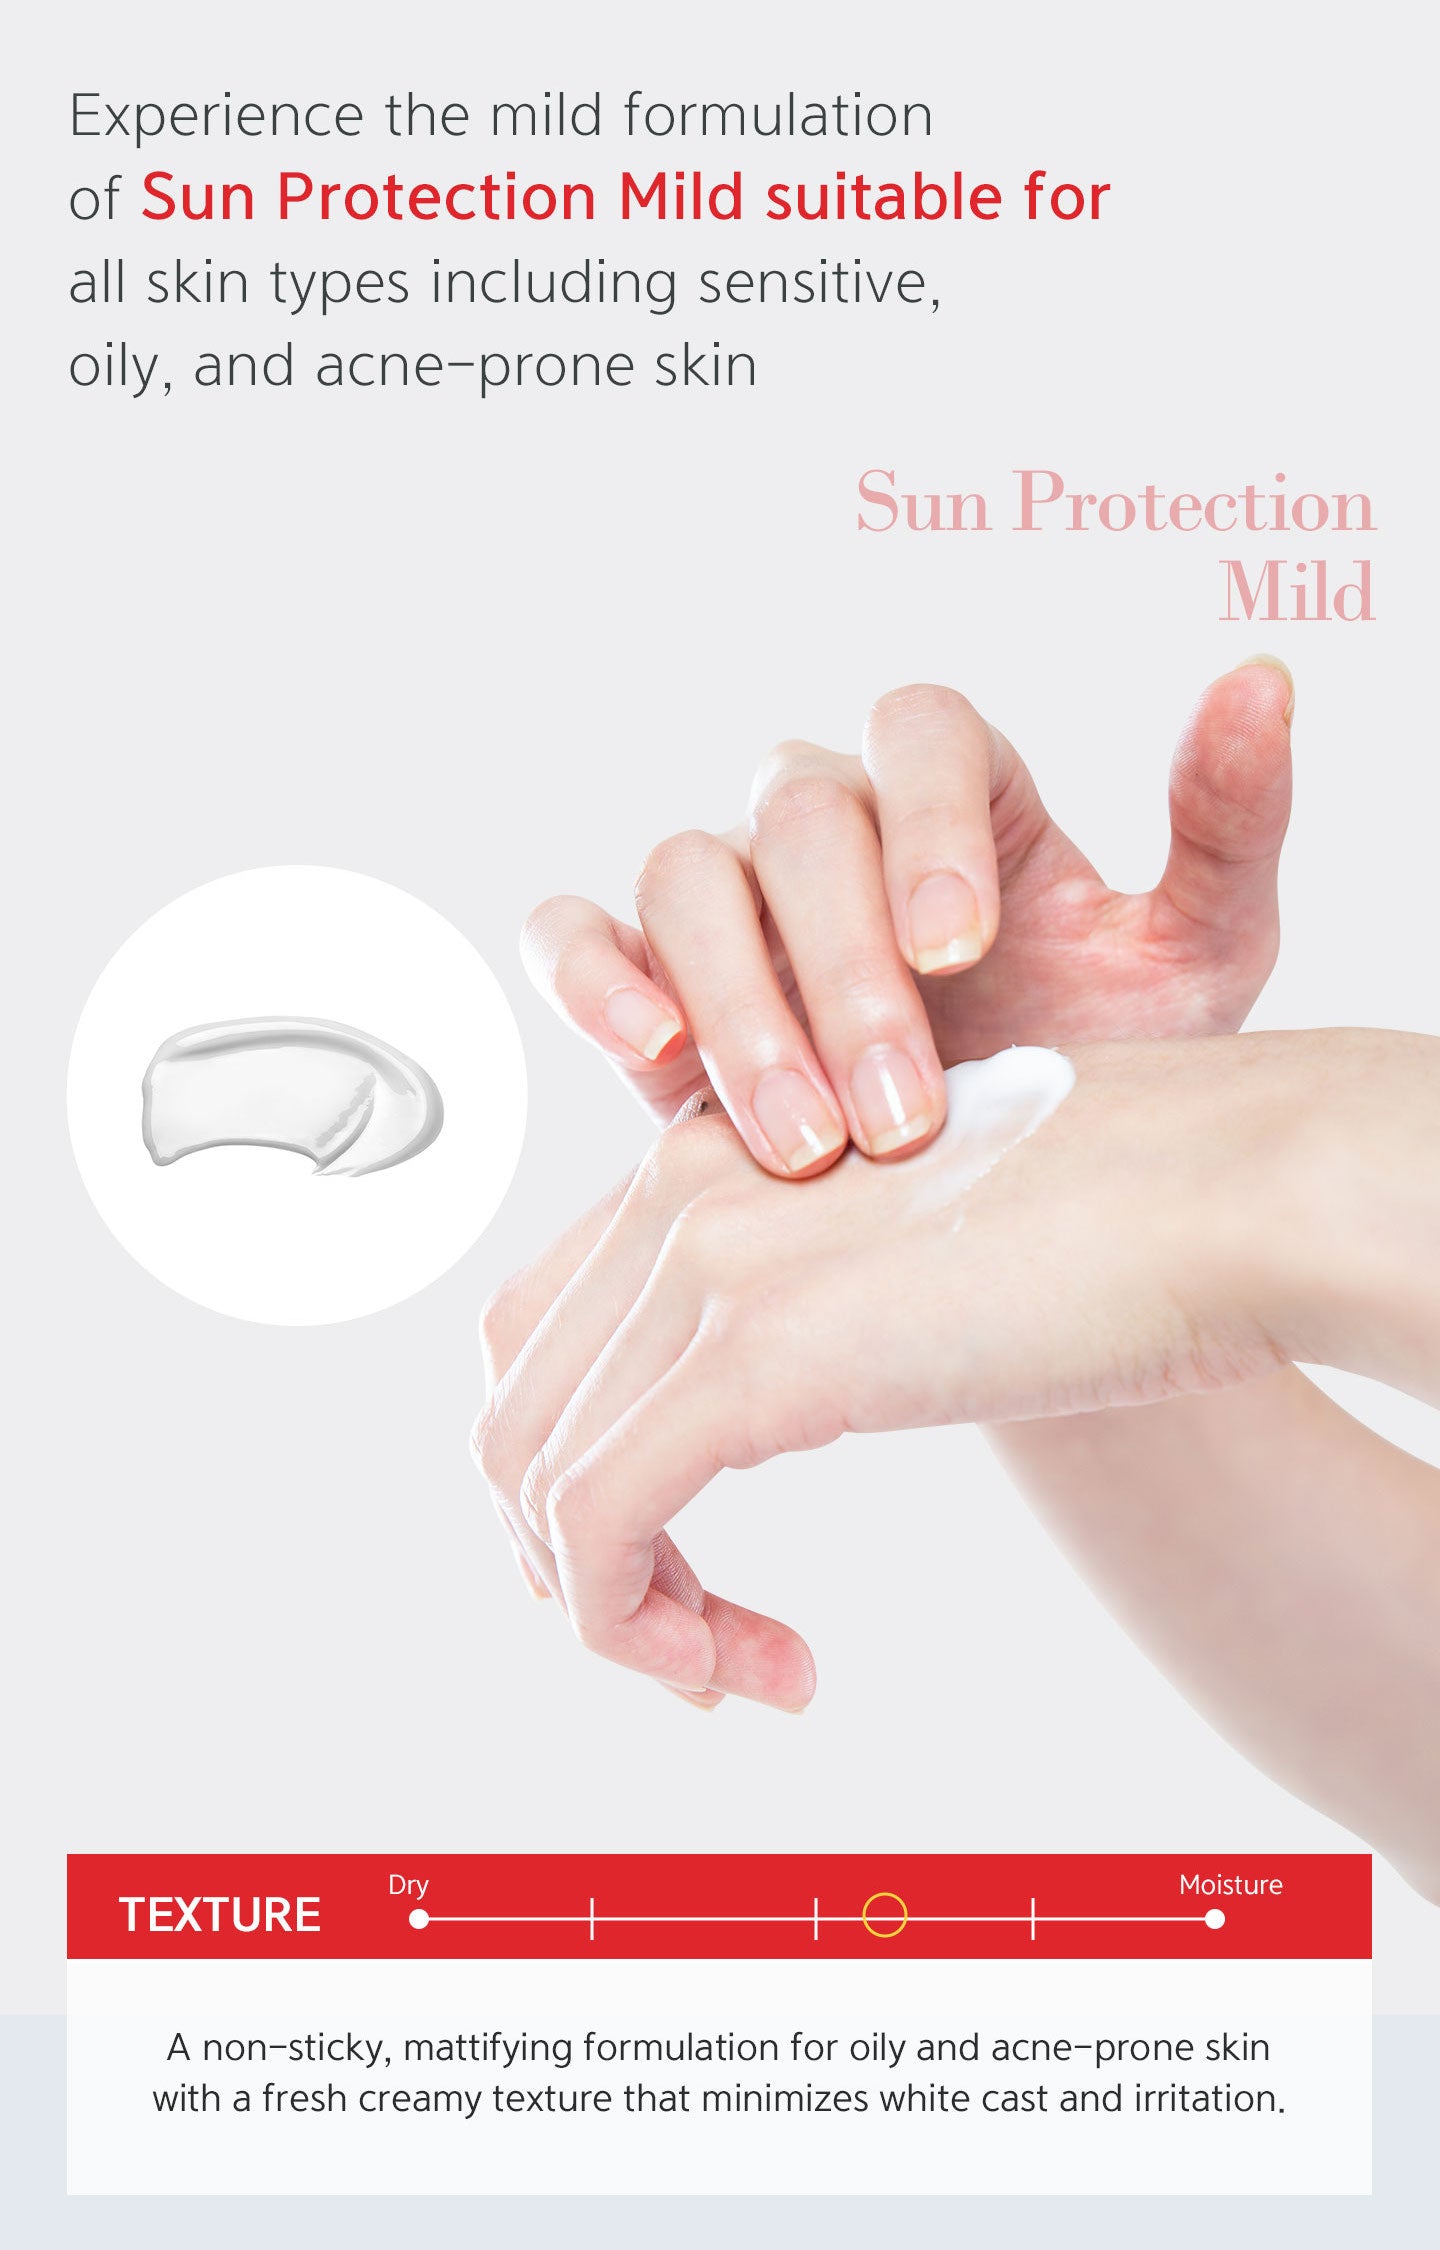 Experience the mild formulation of sun protection mild suitable for all skin types including sensitive, oily, and acne-prone skin. 